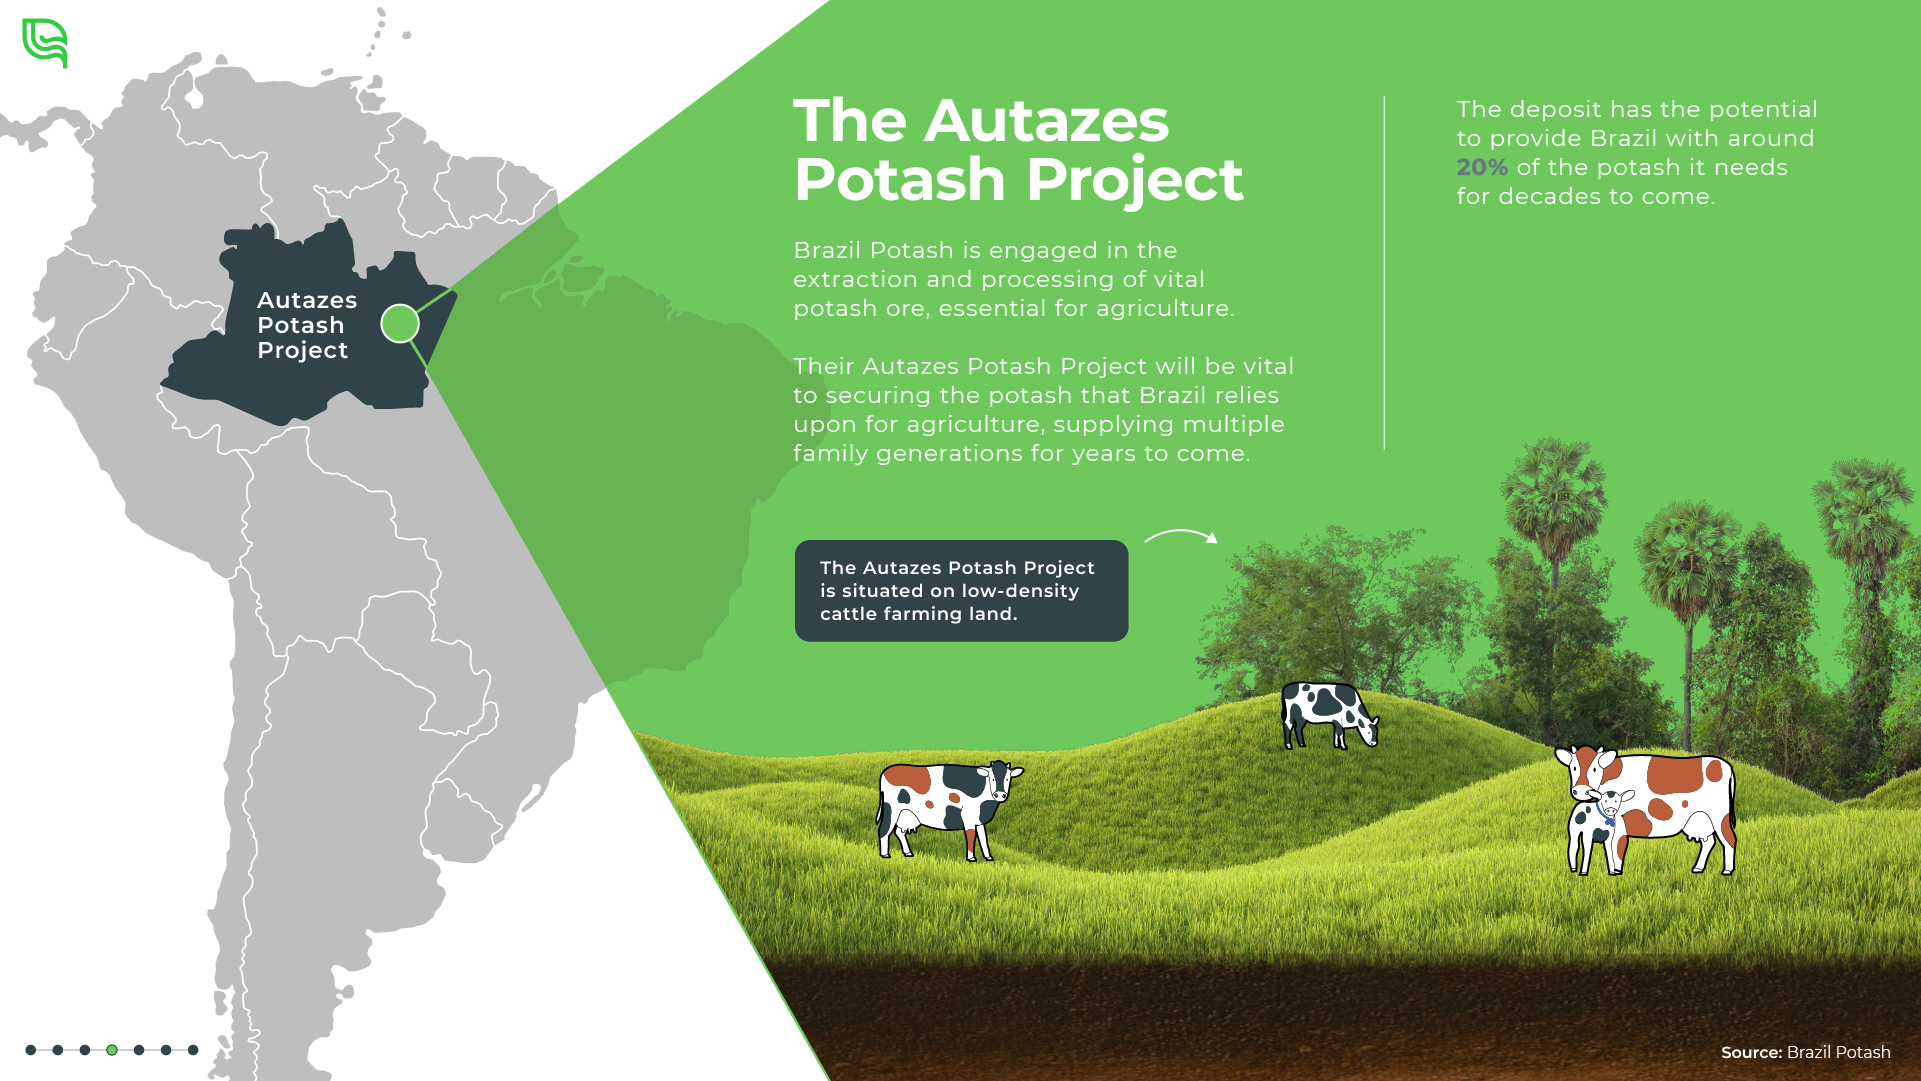 Graphic narrowing in on the Autazes and highlighting its ability to sustain the Brazilian potash market.